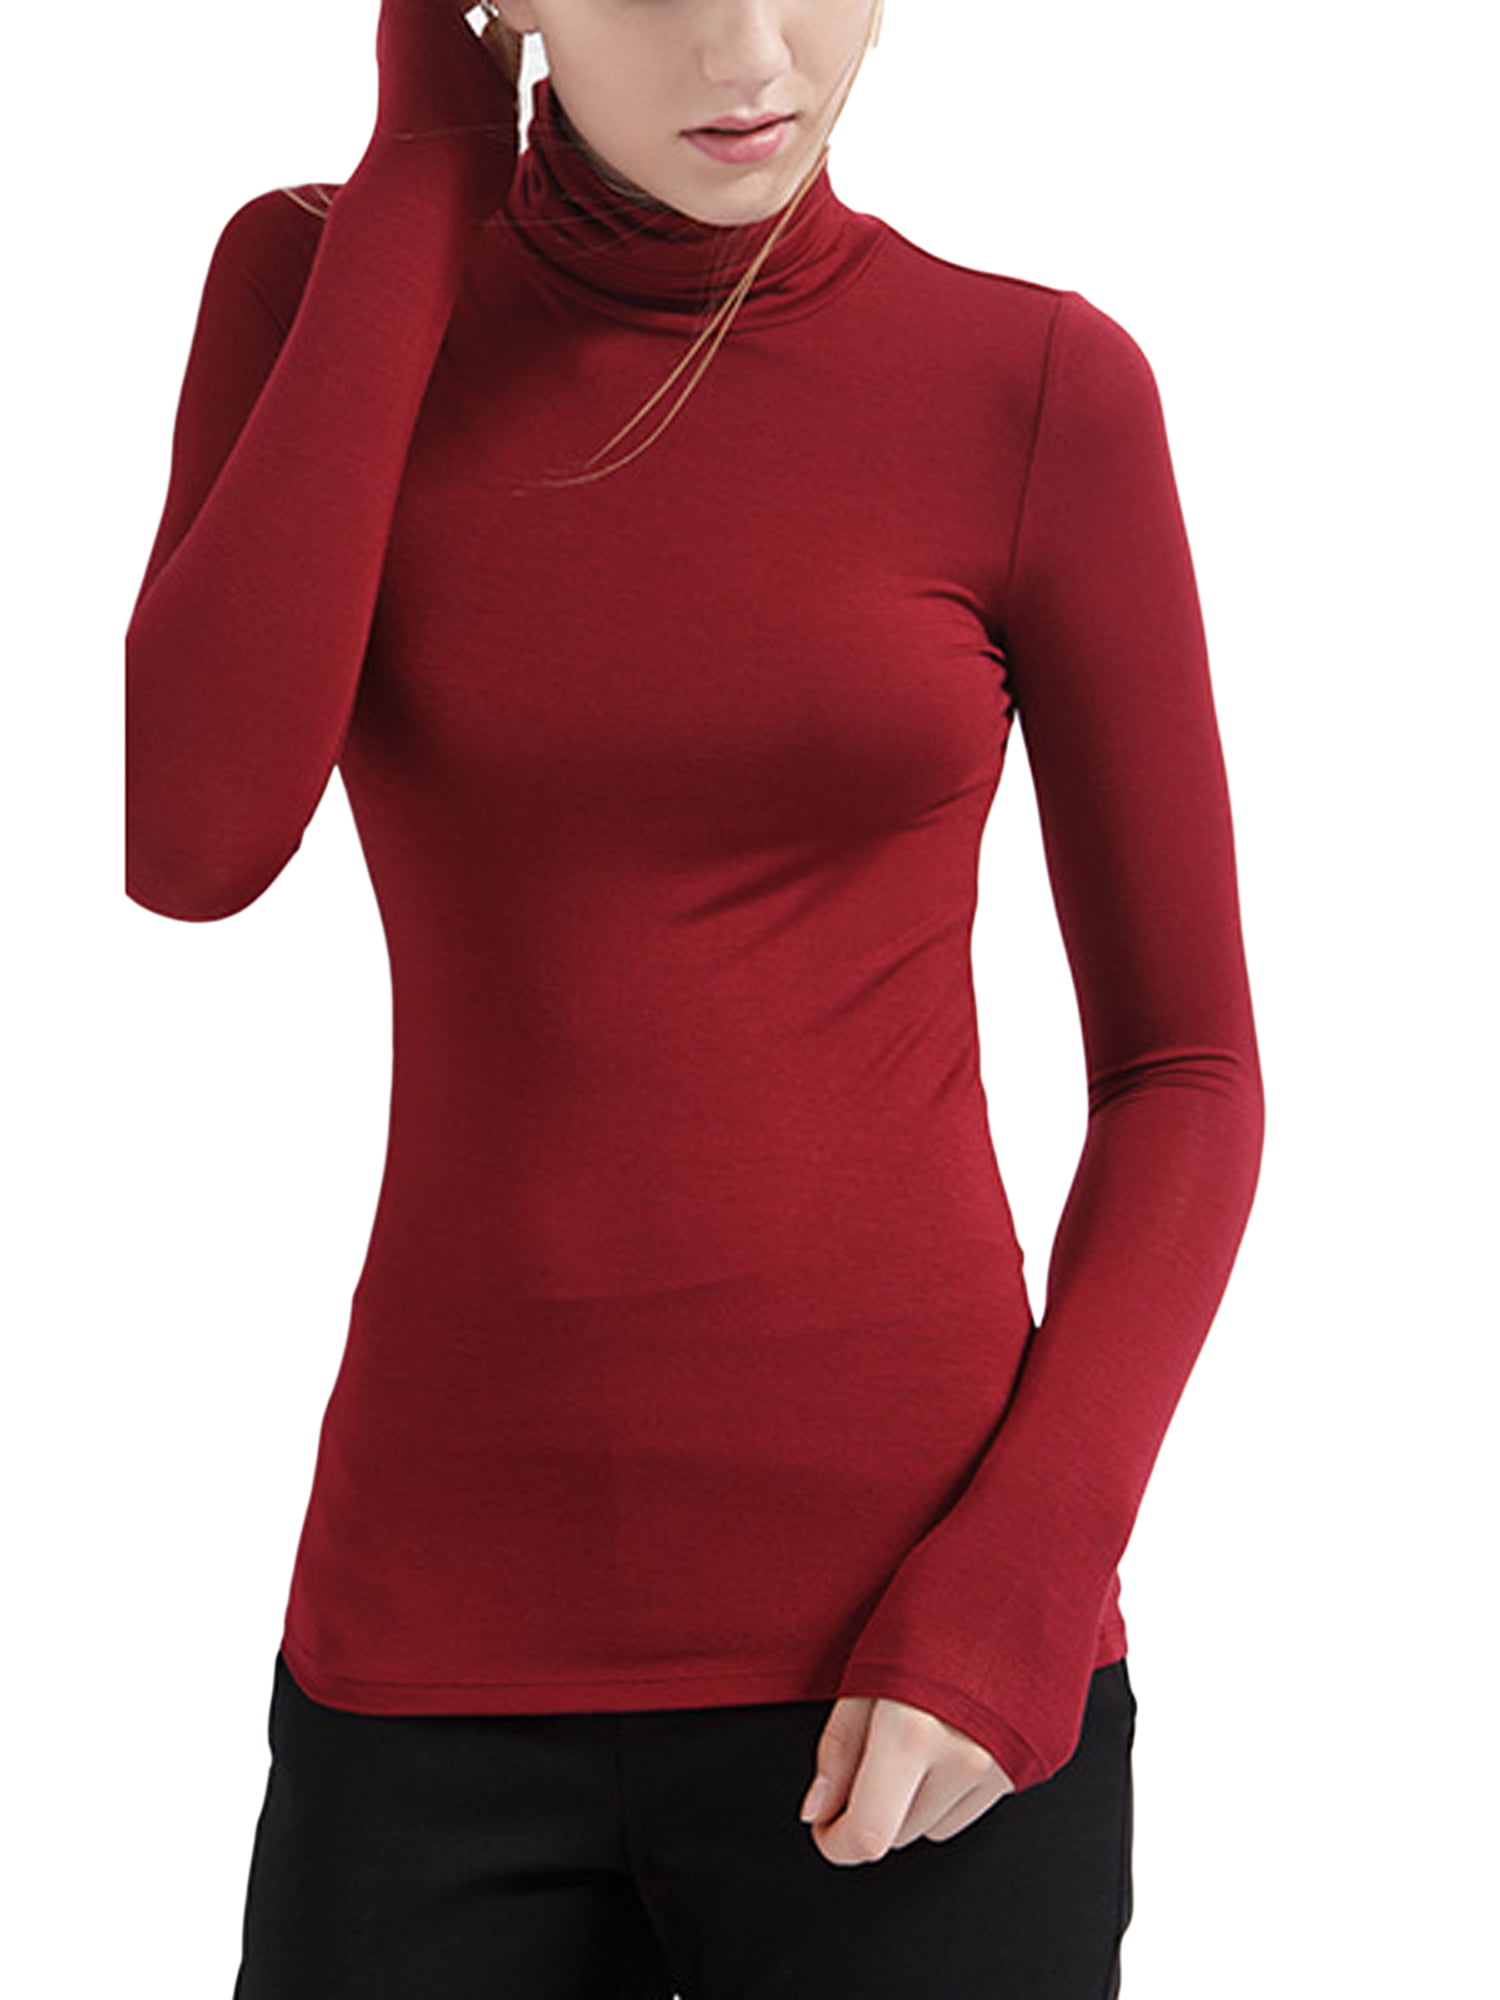 Shirts Women\'s Stretchy Base Musuos Modal Soft Sleeve Fitted Long Layer Pullover, Base Tops Slim Turtleneck